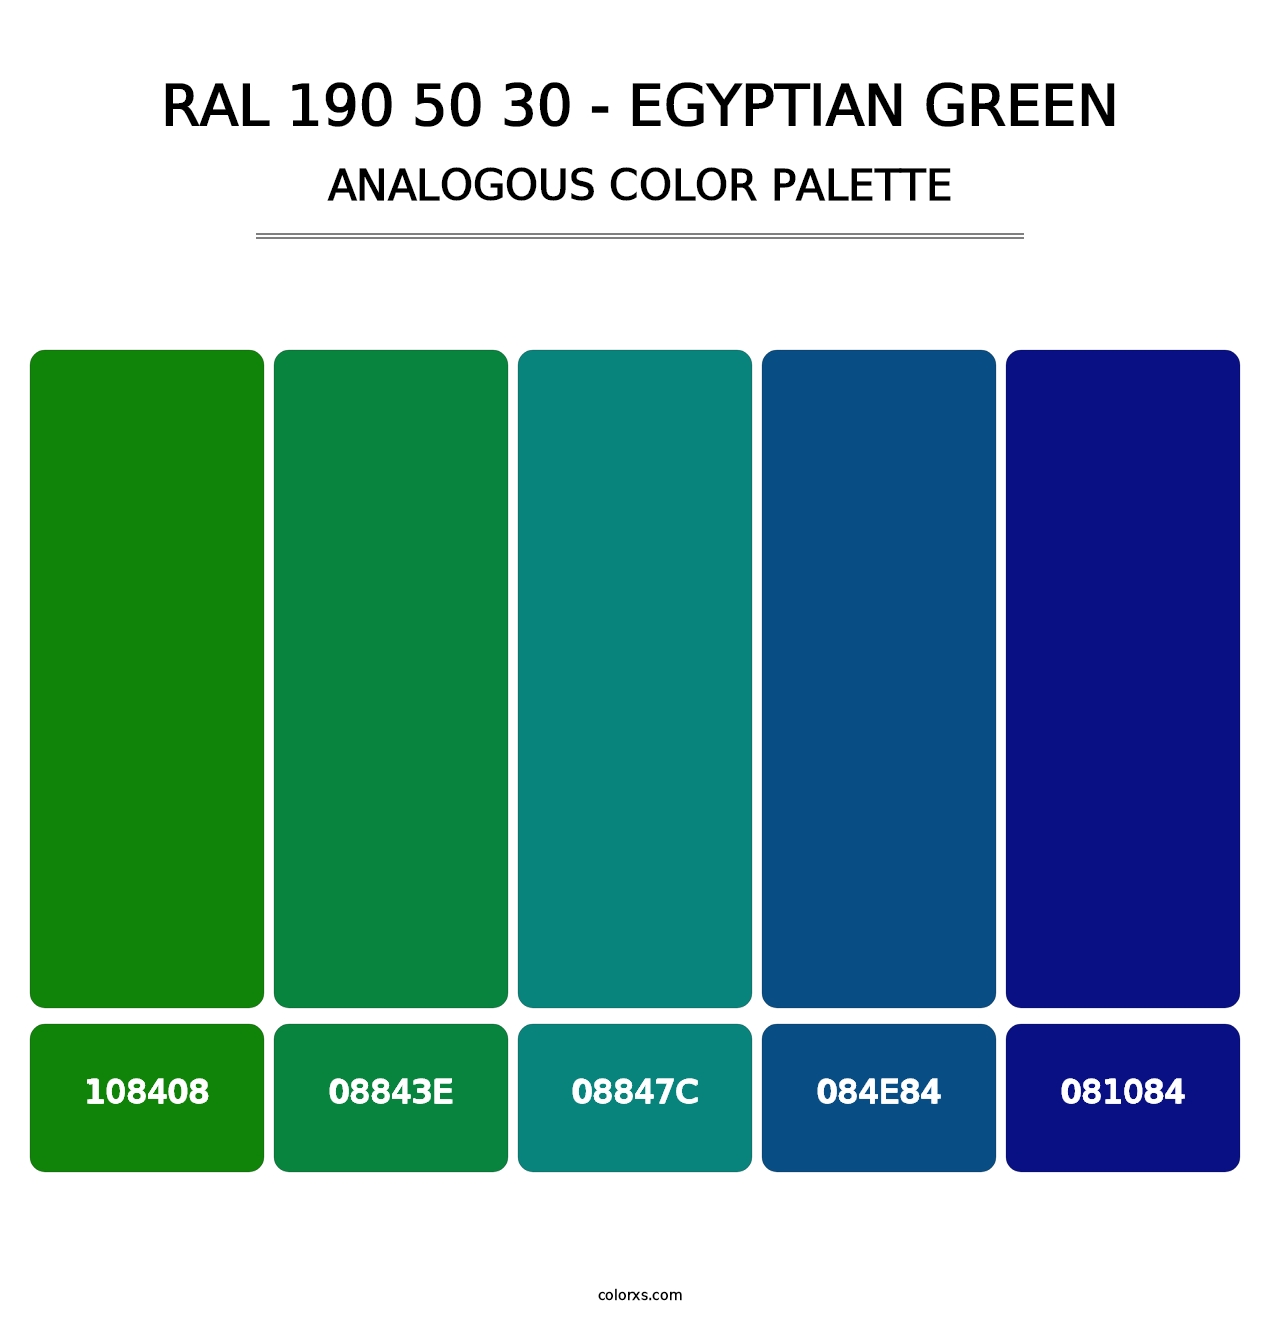 RAL 190 50 30 - Egyptian Green - Analogous Color Palette